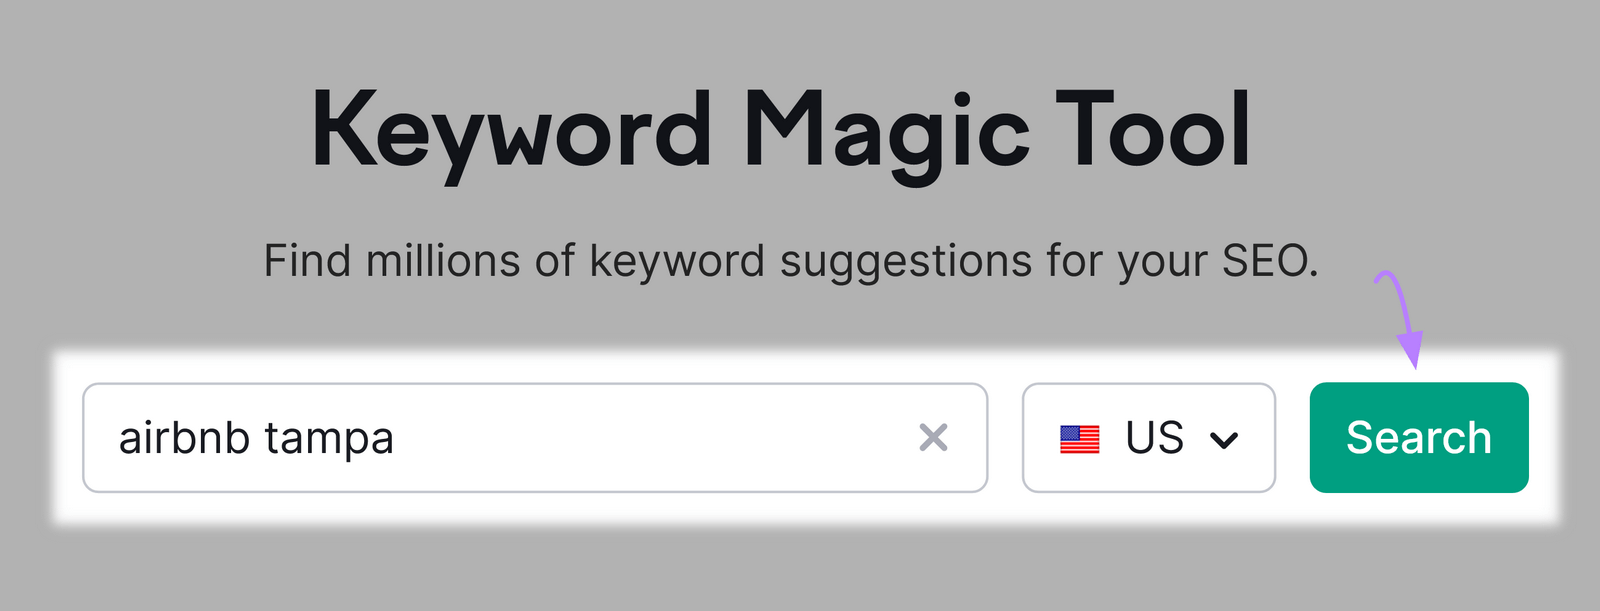 screenshot of Keyword Magic Tool with "airbnb tampa" in the search bar